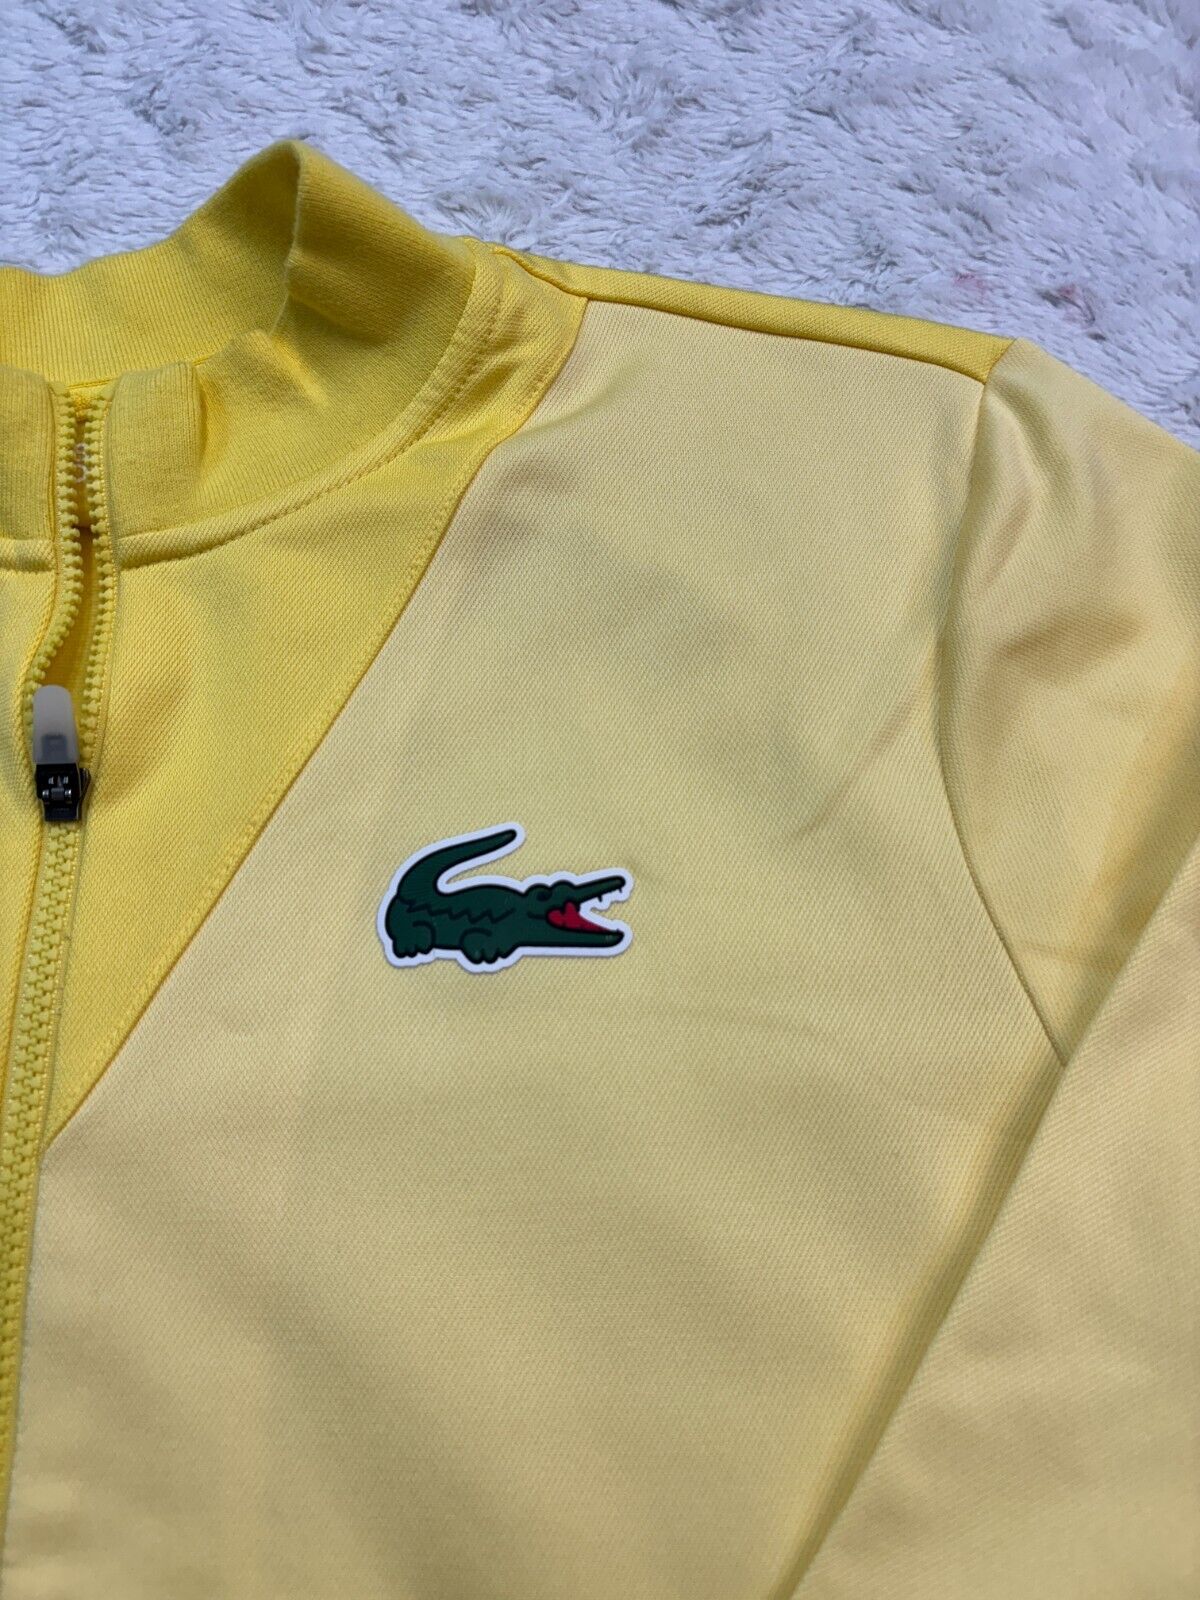 Lacoste Sport Track Jacket XXL Full Zip Miami Open Tennis Yellow Mens Spell out